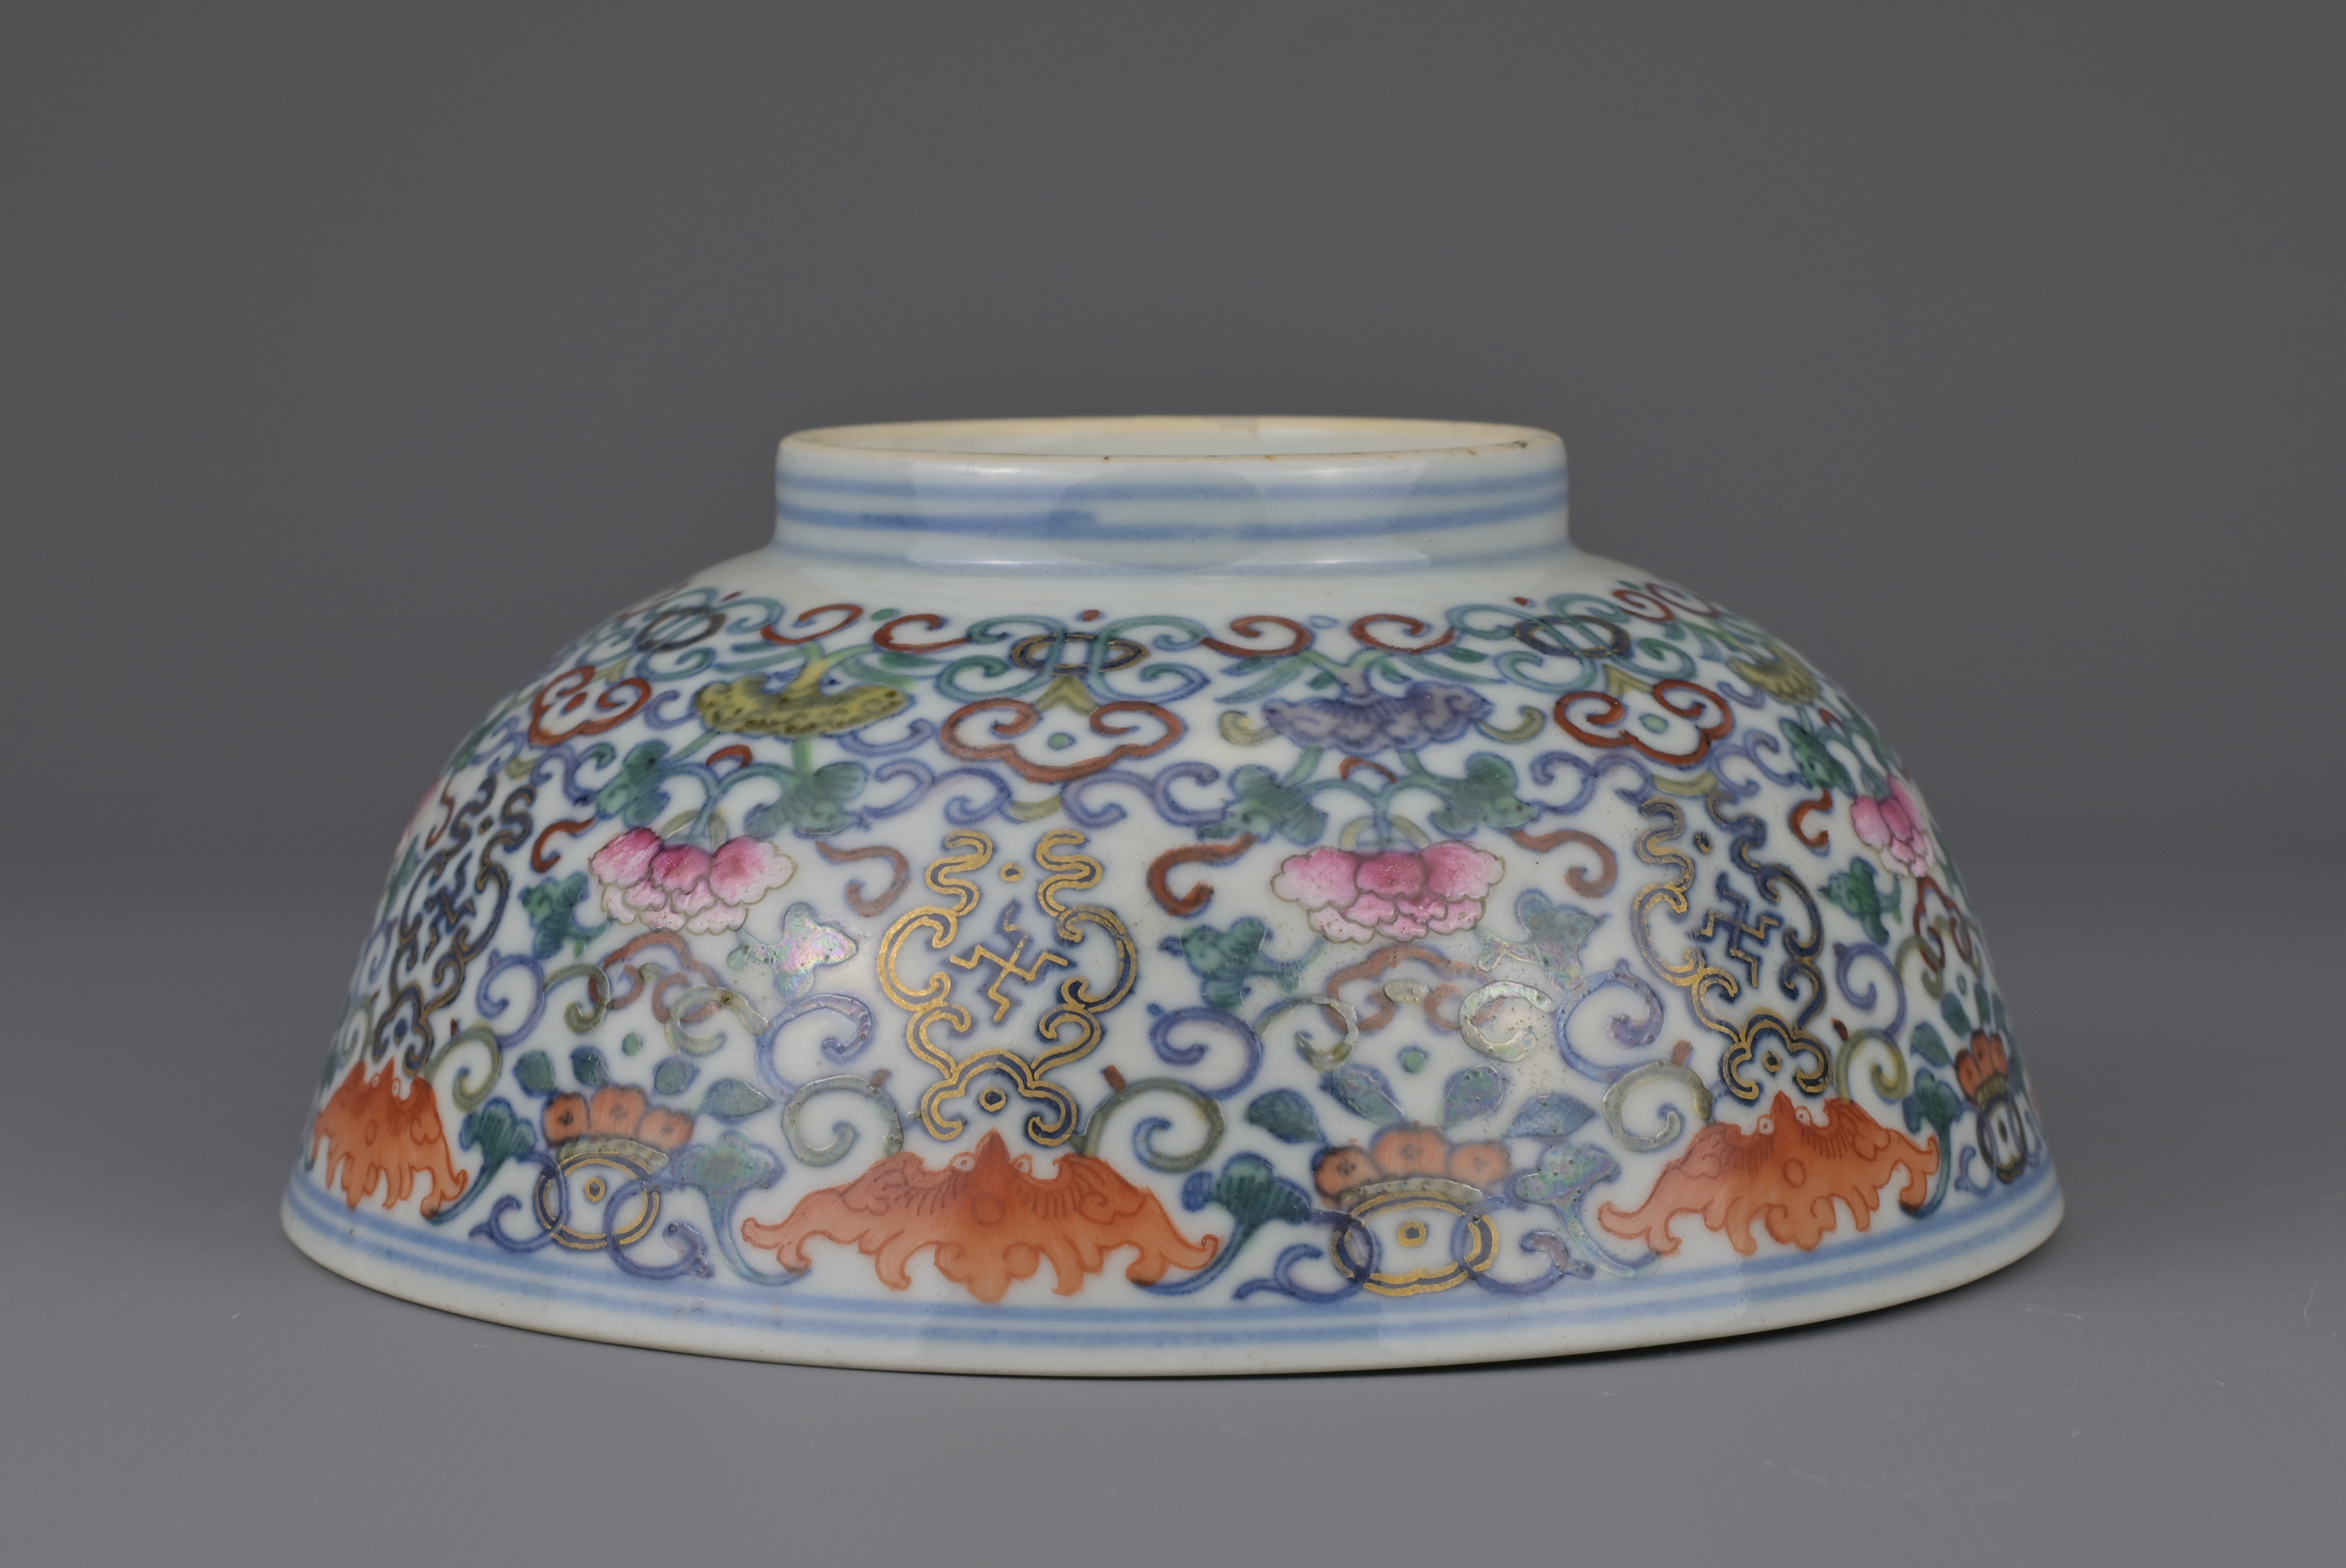 FINE CHINESE DOUCAI PORCELAIN BOWL, JIAQING MARK AND PERIOD, EARLY 19th CENTURY - Image 8 of 9